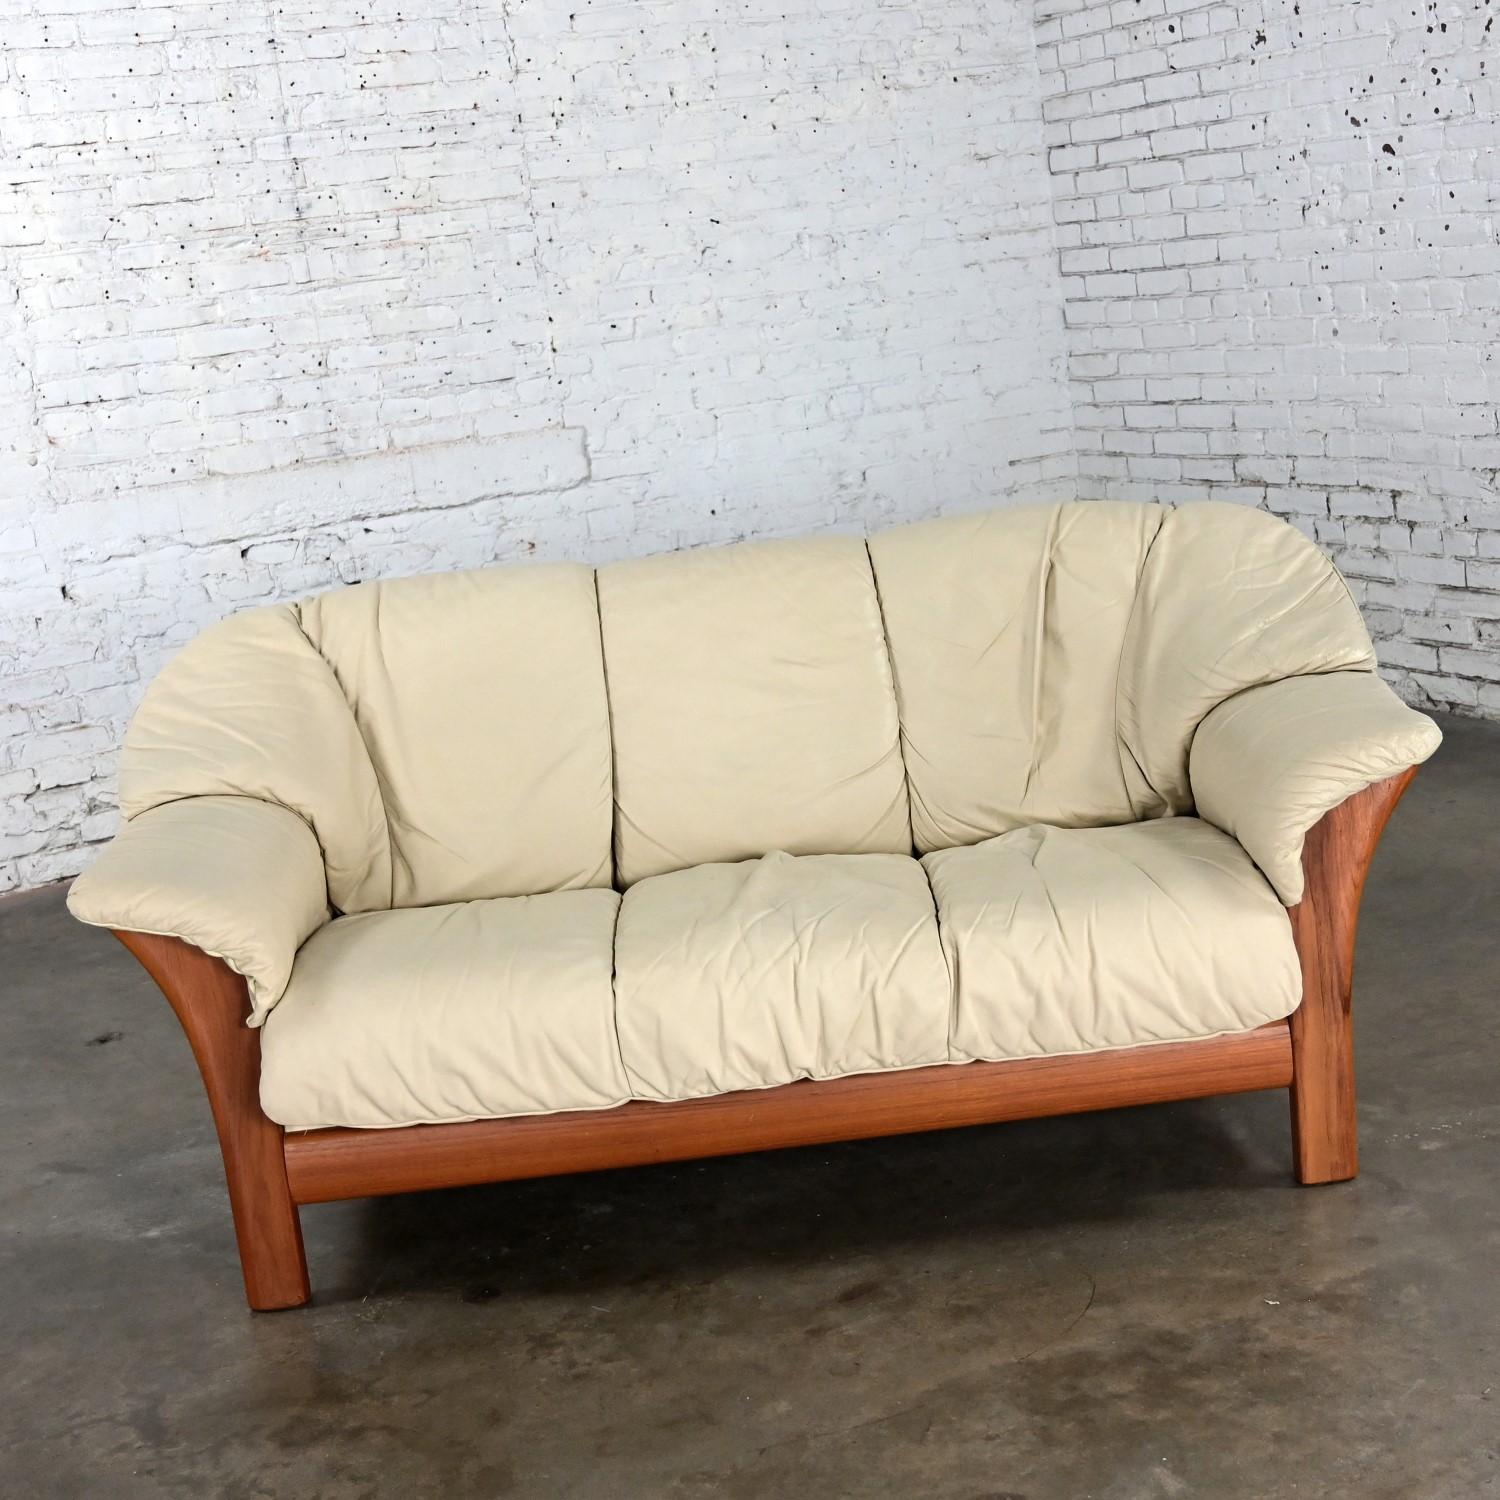 20th Century Scandinavian Modern Teak & Off White Leather Small Sofa Attributed to Ekornes For Sale